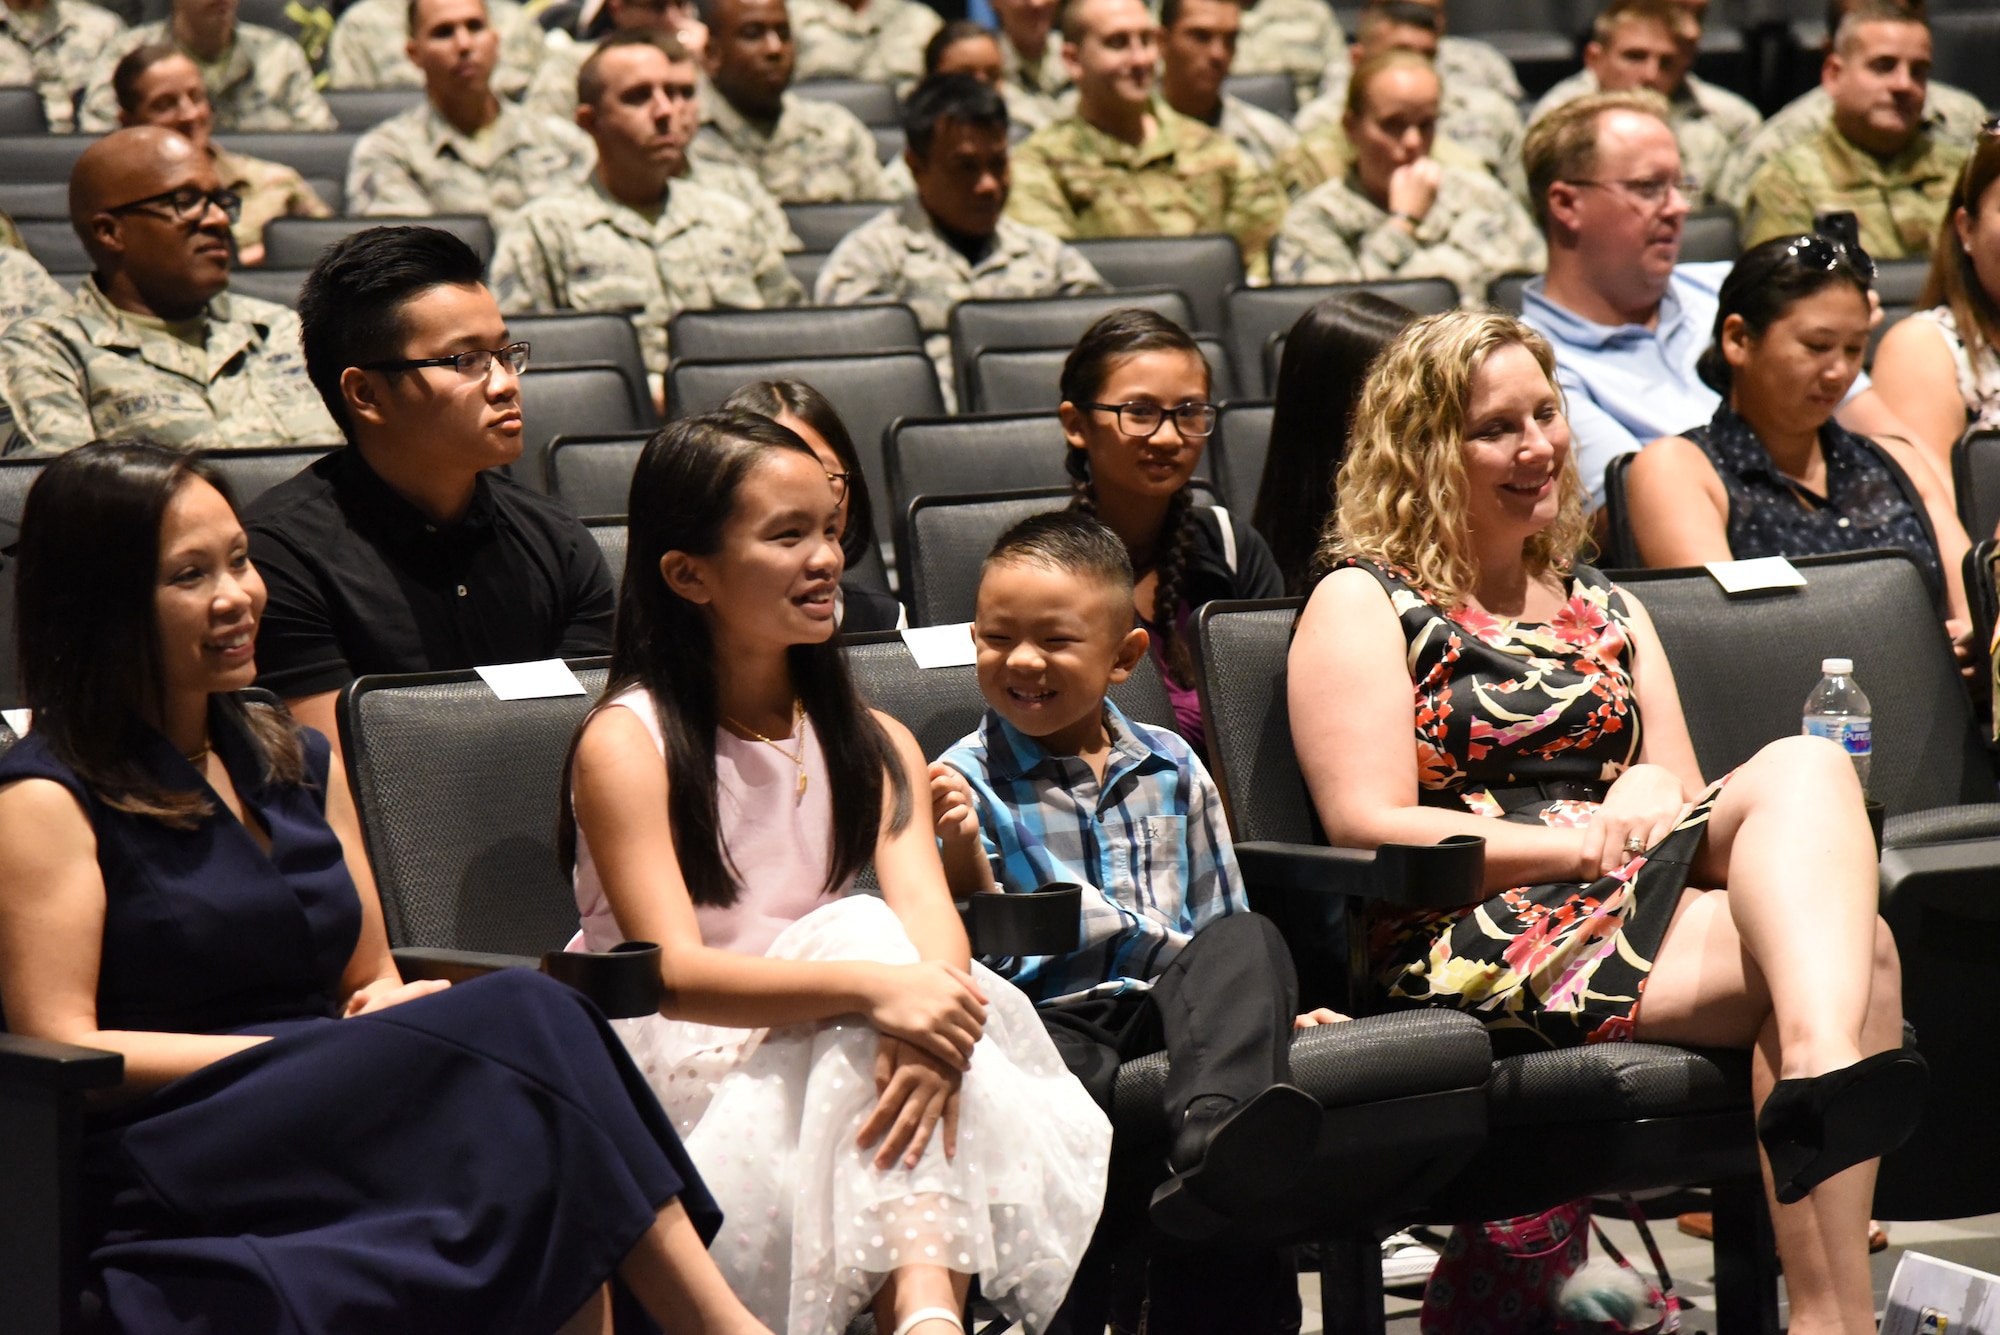 Lt. Col. Asan Bui’s family and friends attend his assumption of command ceremony at Patrick Air Force Base, Florida, on July 14, 2018. The event recognized Bui's transition on becaming the 920th Communications Flight commander.  (U.S. Air Force photo by Senior Airman Brandon Kalloo Sanes)